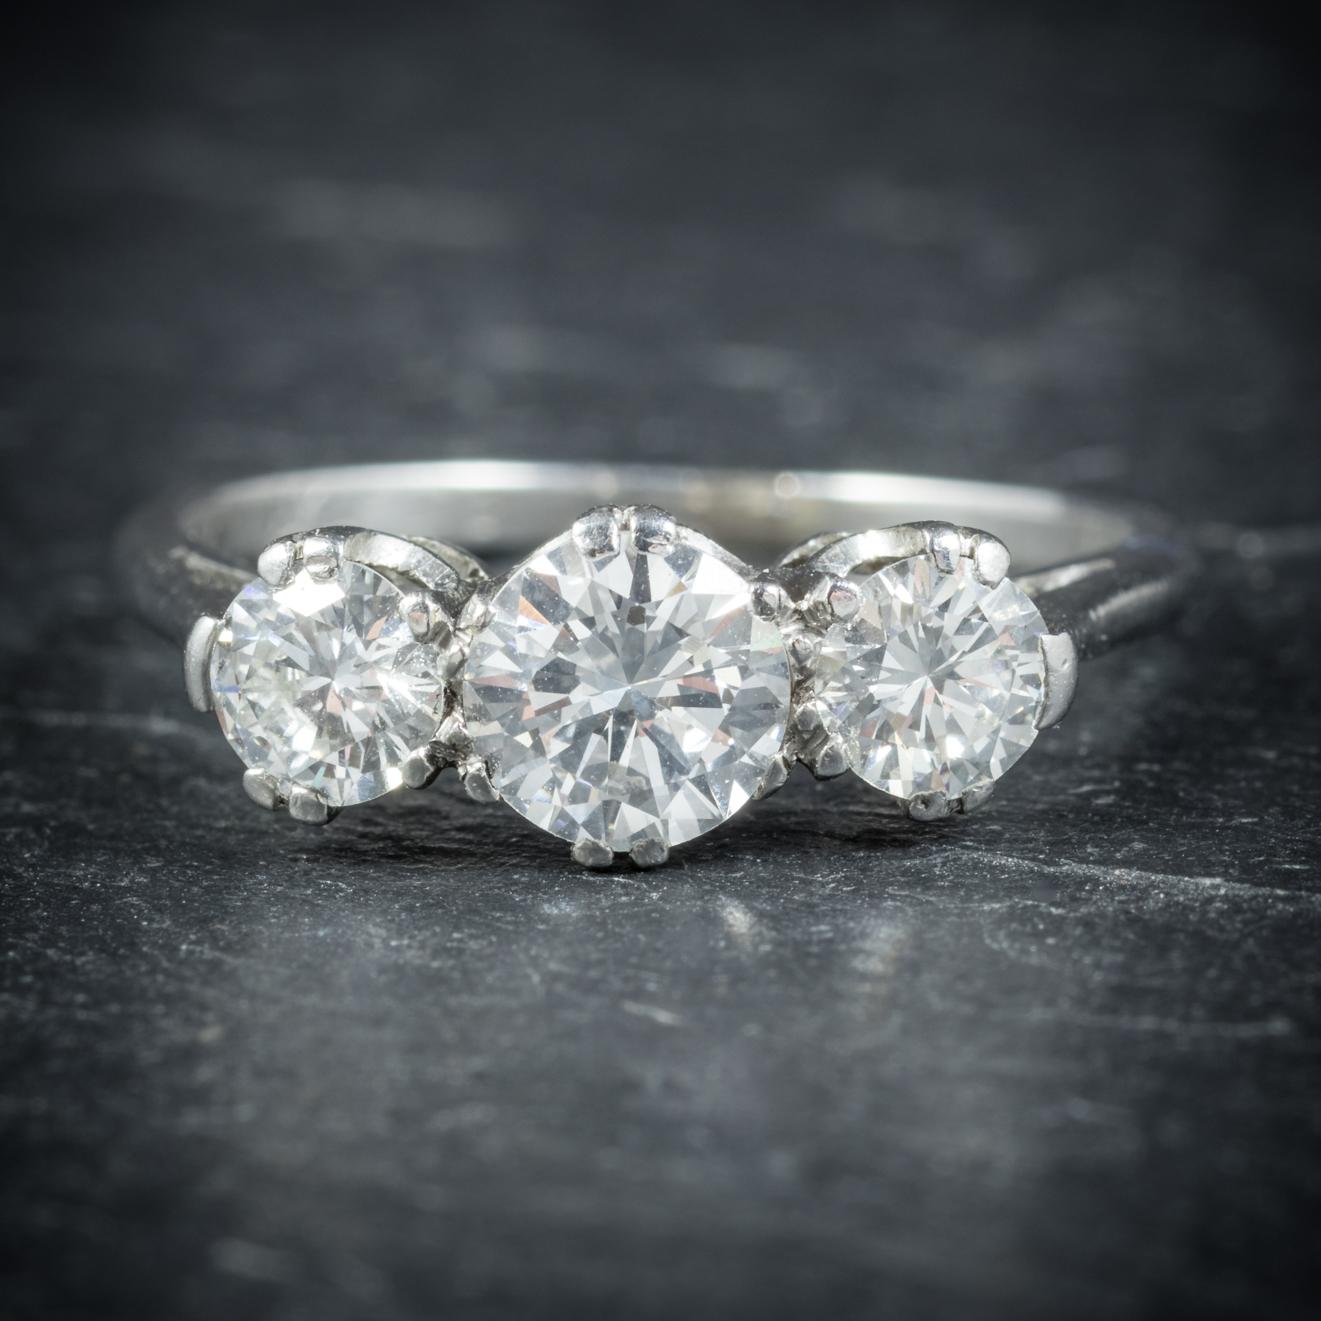 An elegant antique Diamond trilogy Ring from the Edwardian era, Circa 1910

Adorned with a 0.75ct old cut Diamond in the centre flanked by two 0.25ct Diamonds at either side

The Diamonds are VS1 Clarity and H colour and sparkle beautifully in the